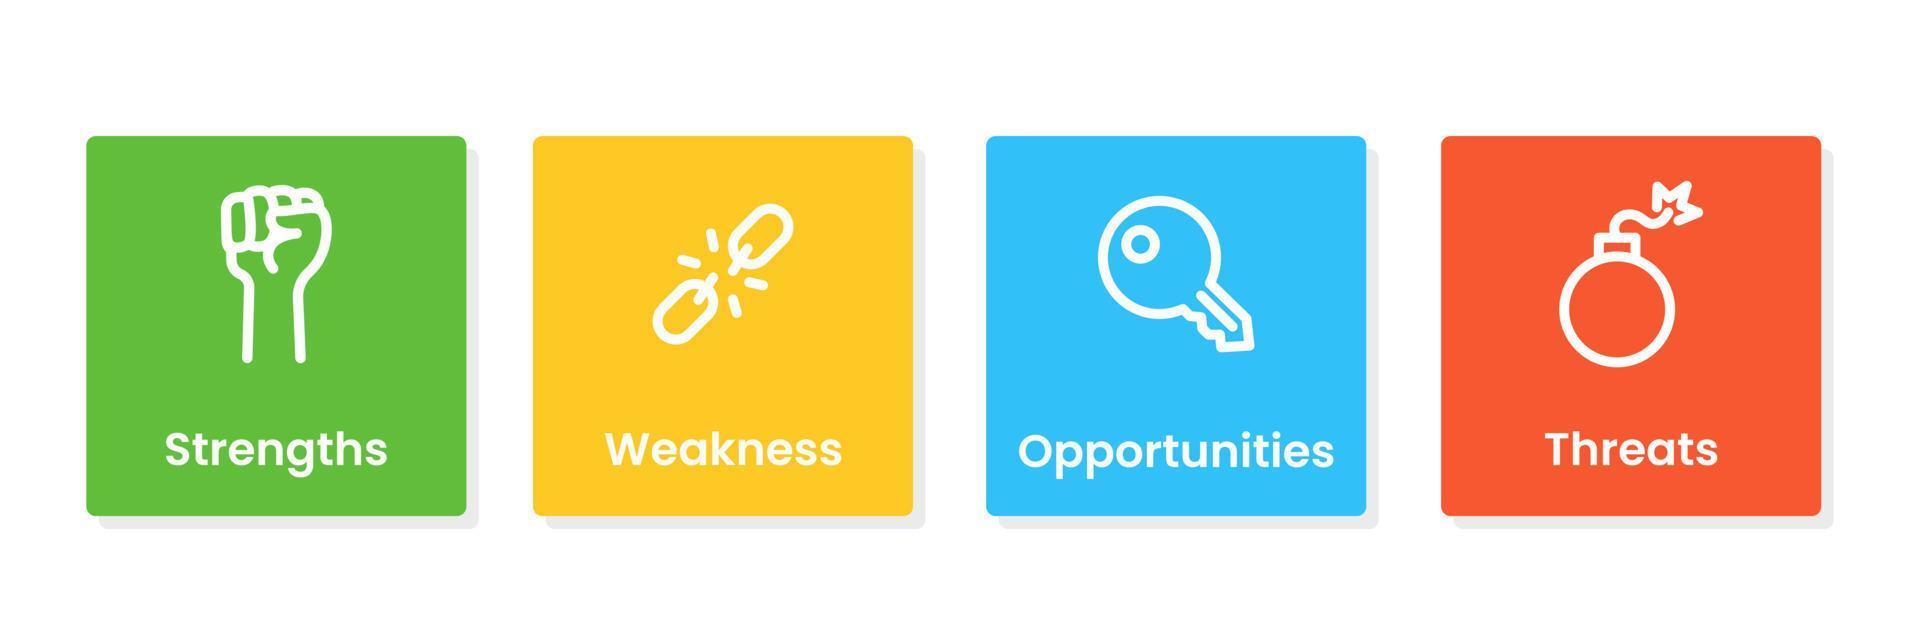 Infographic SWOT-analysis. Four colorful element squares with icons. Analysis of business, strategy, and planning. vector